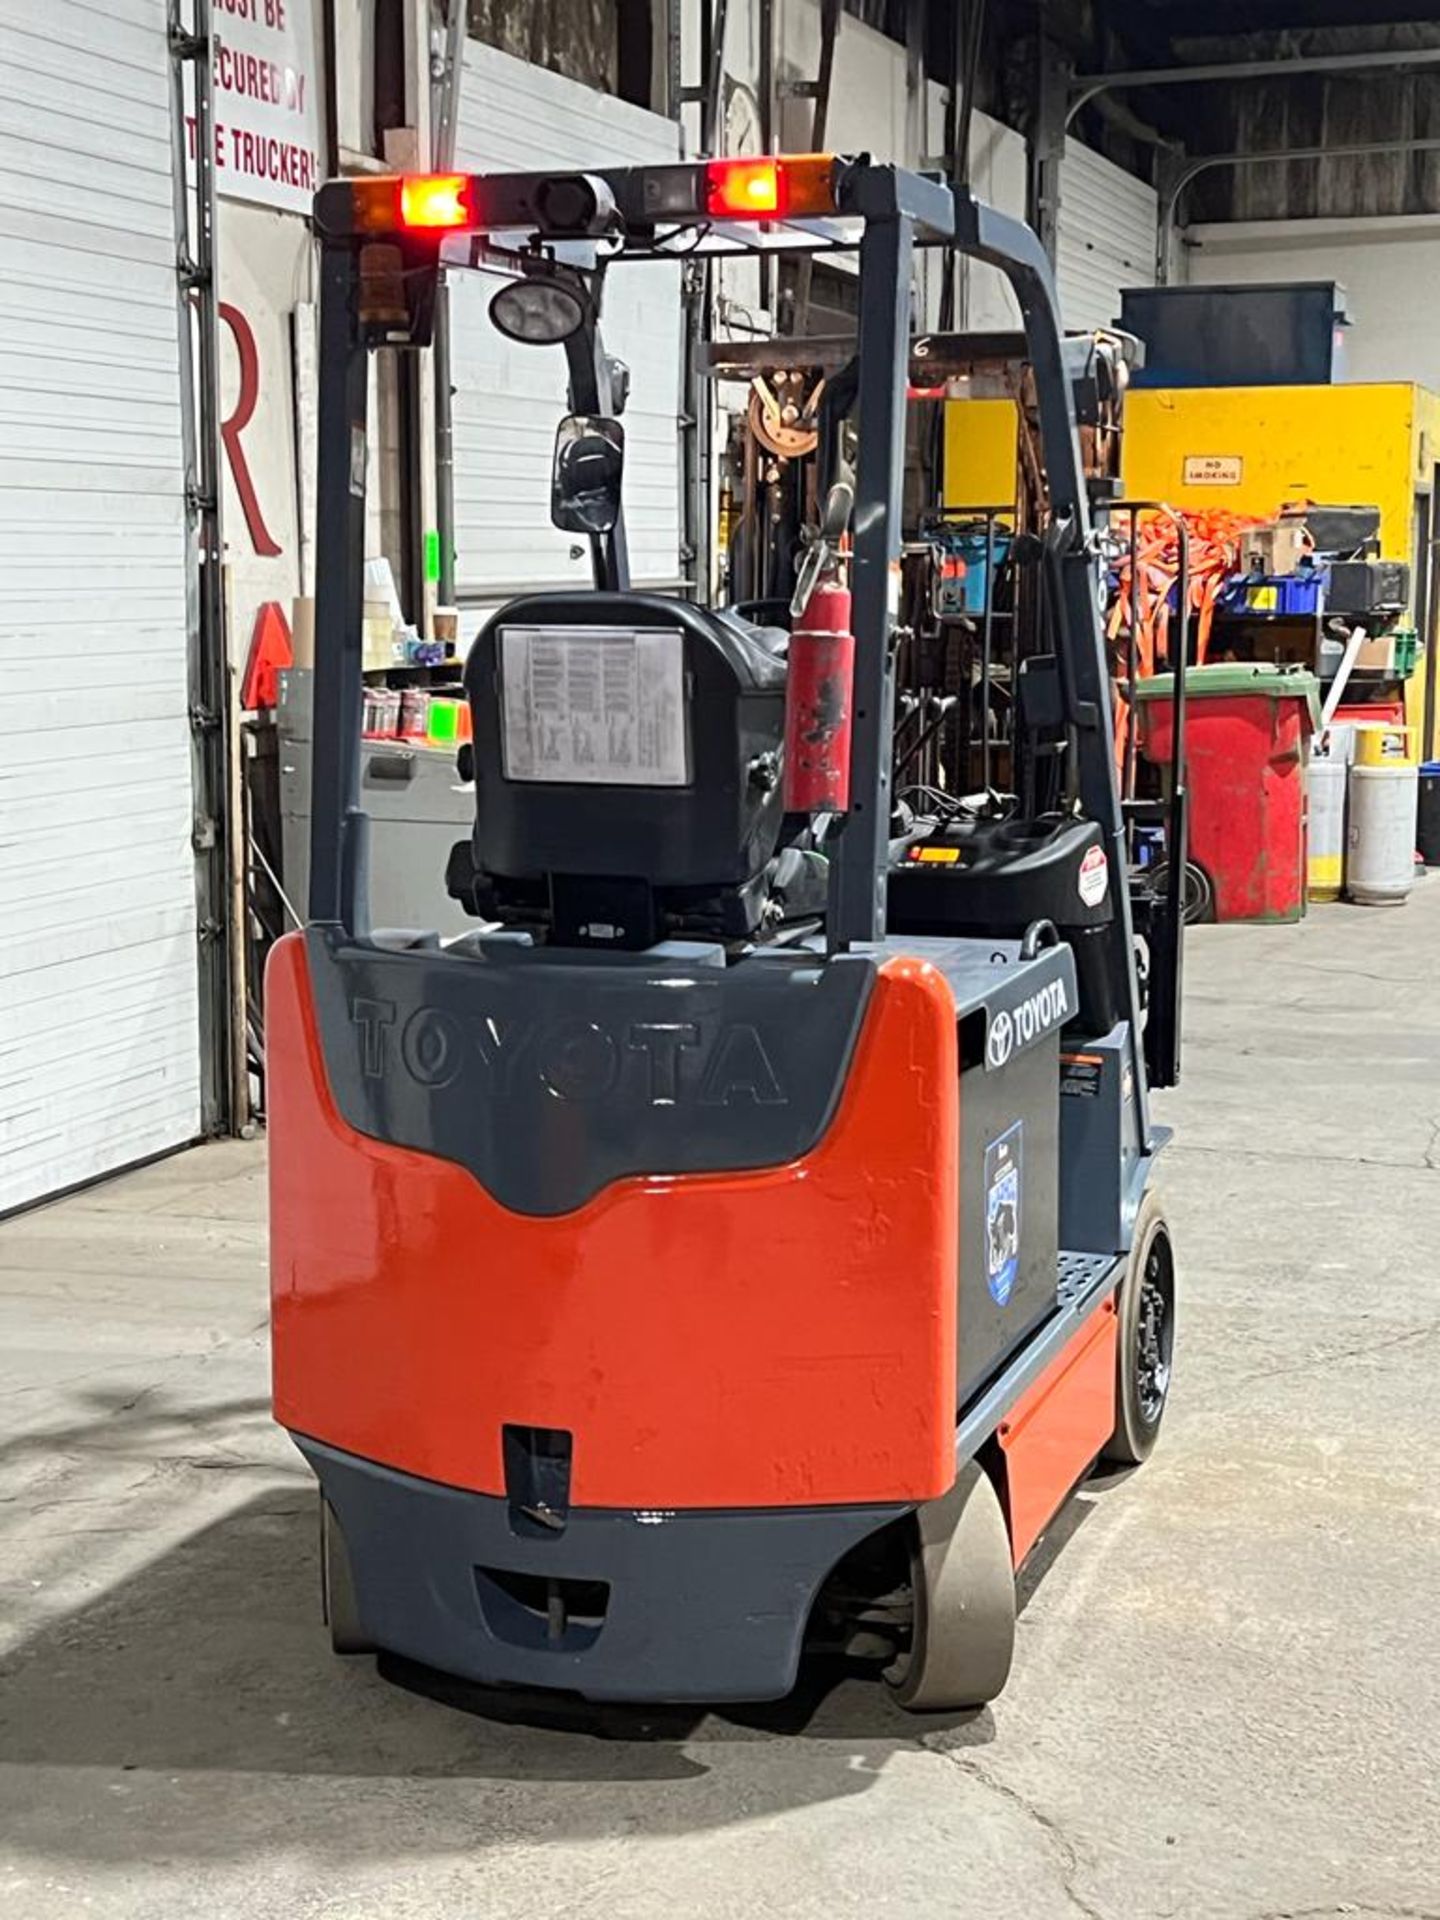 2014 Toyota 5,000lbs Capacity Electric Forklift with sideshift and 3-STAGE MAST - FREE CUSTOMS - Image 2 of 3